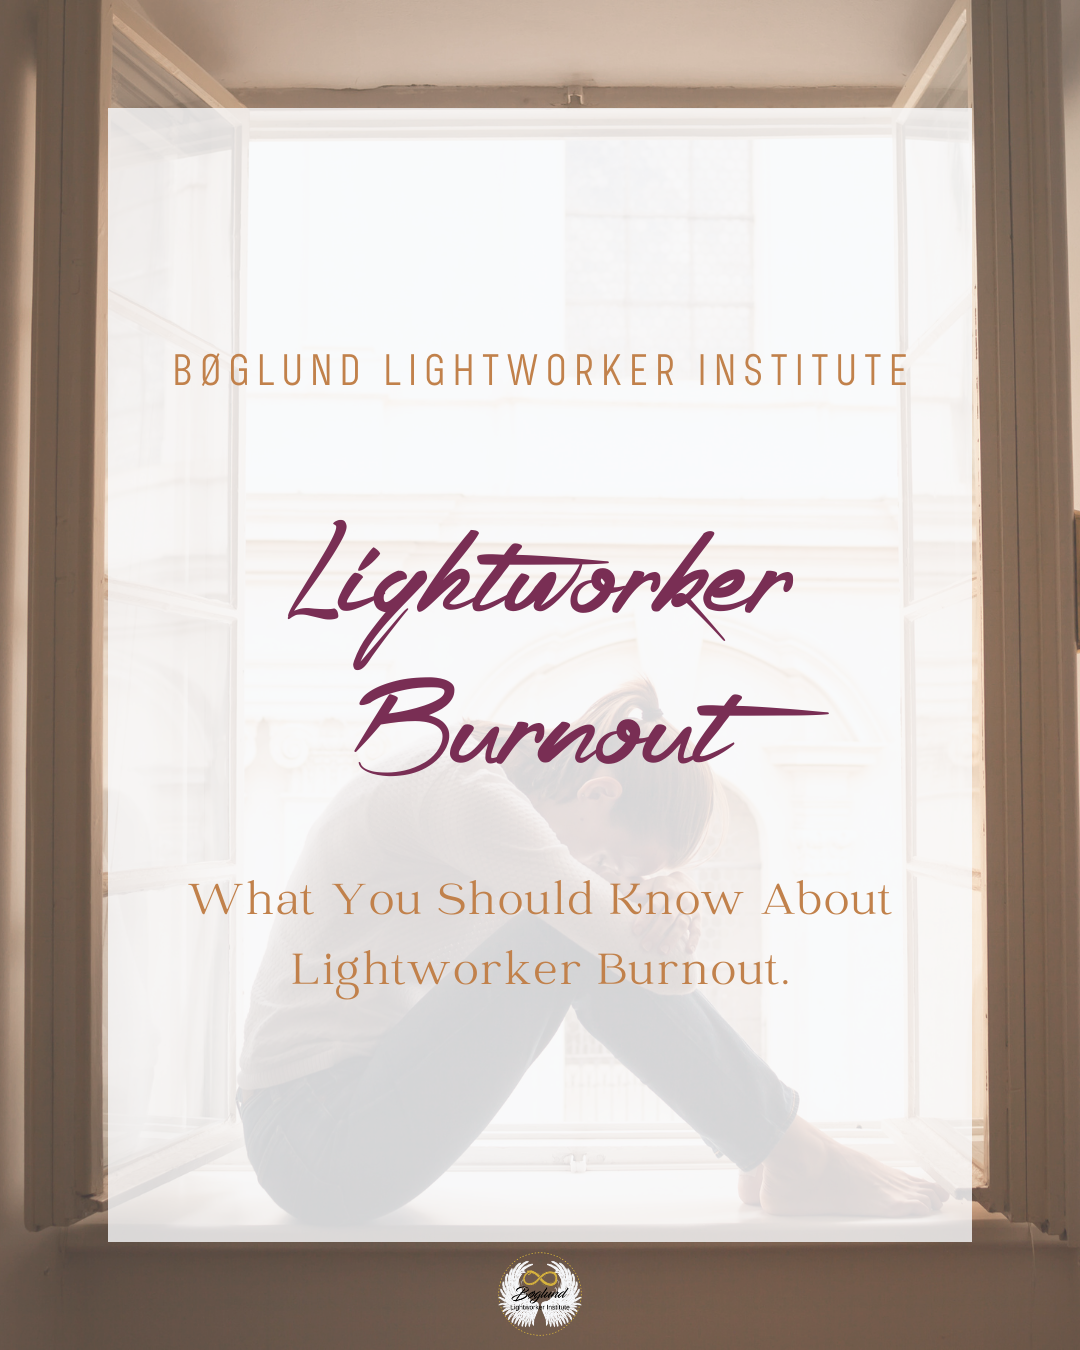 What You Should Know About Lightworker Burnout